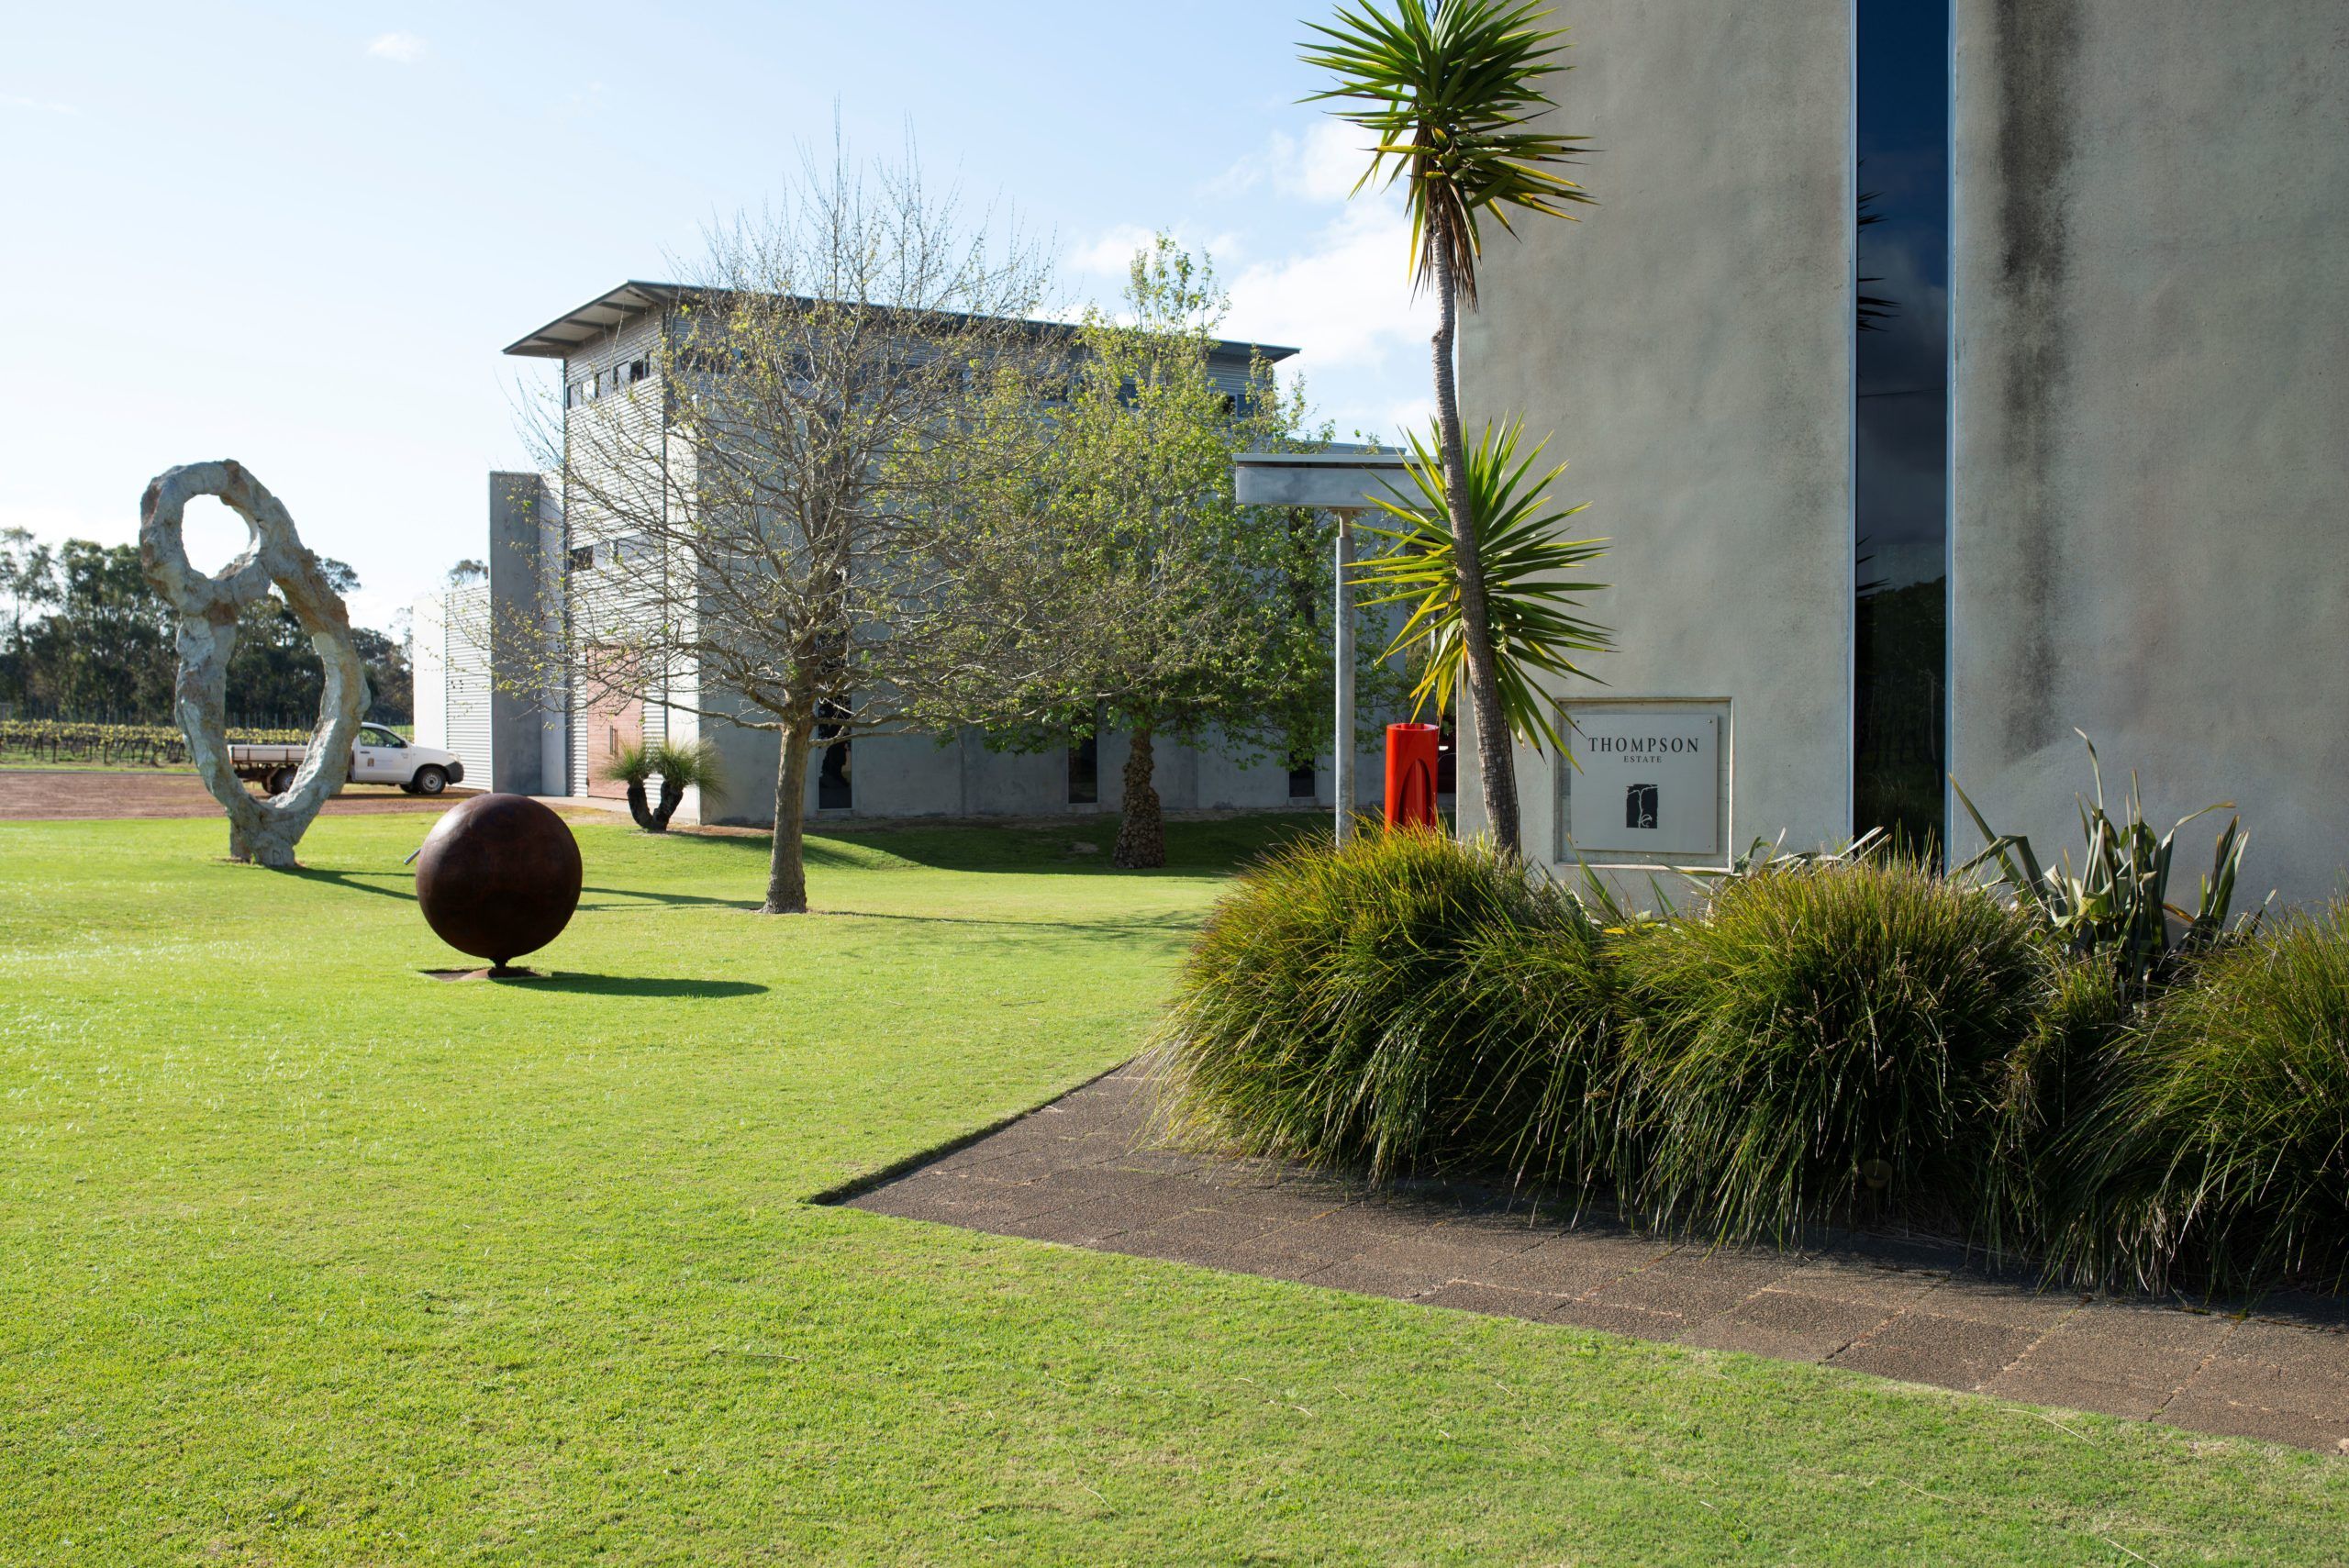 Lawn at Thompson Estate cellar door in Wilyabrup, with sculptures on the lawn.